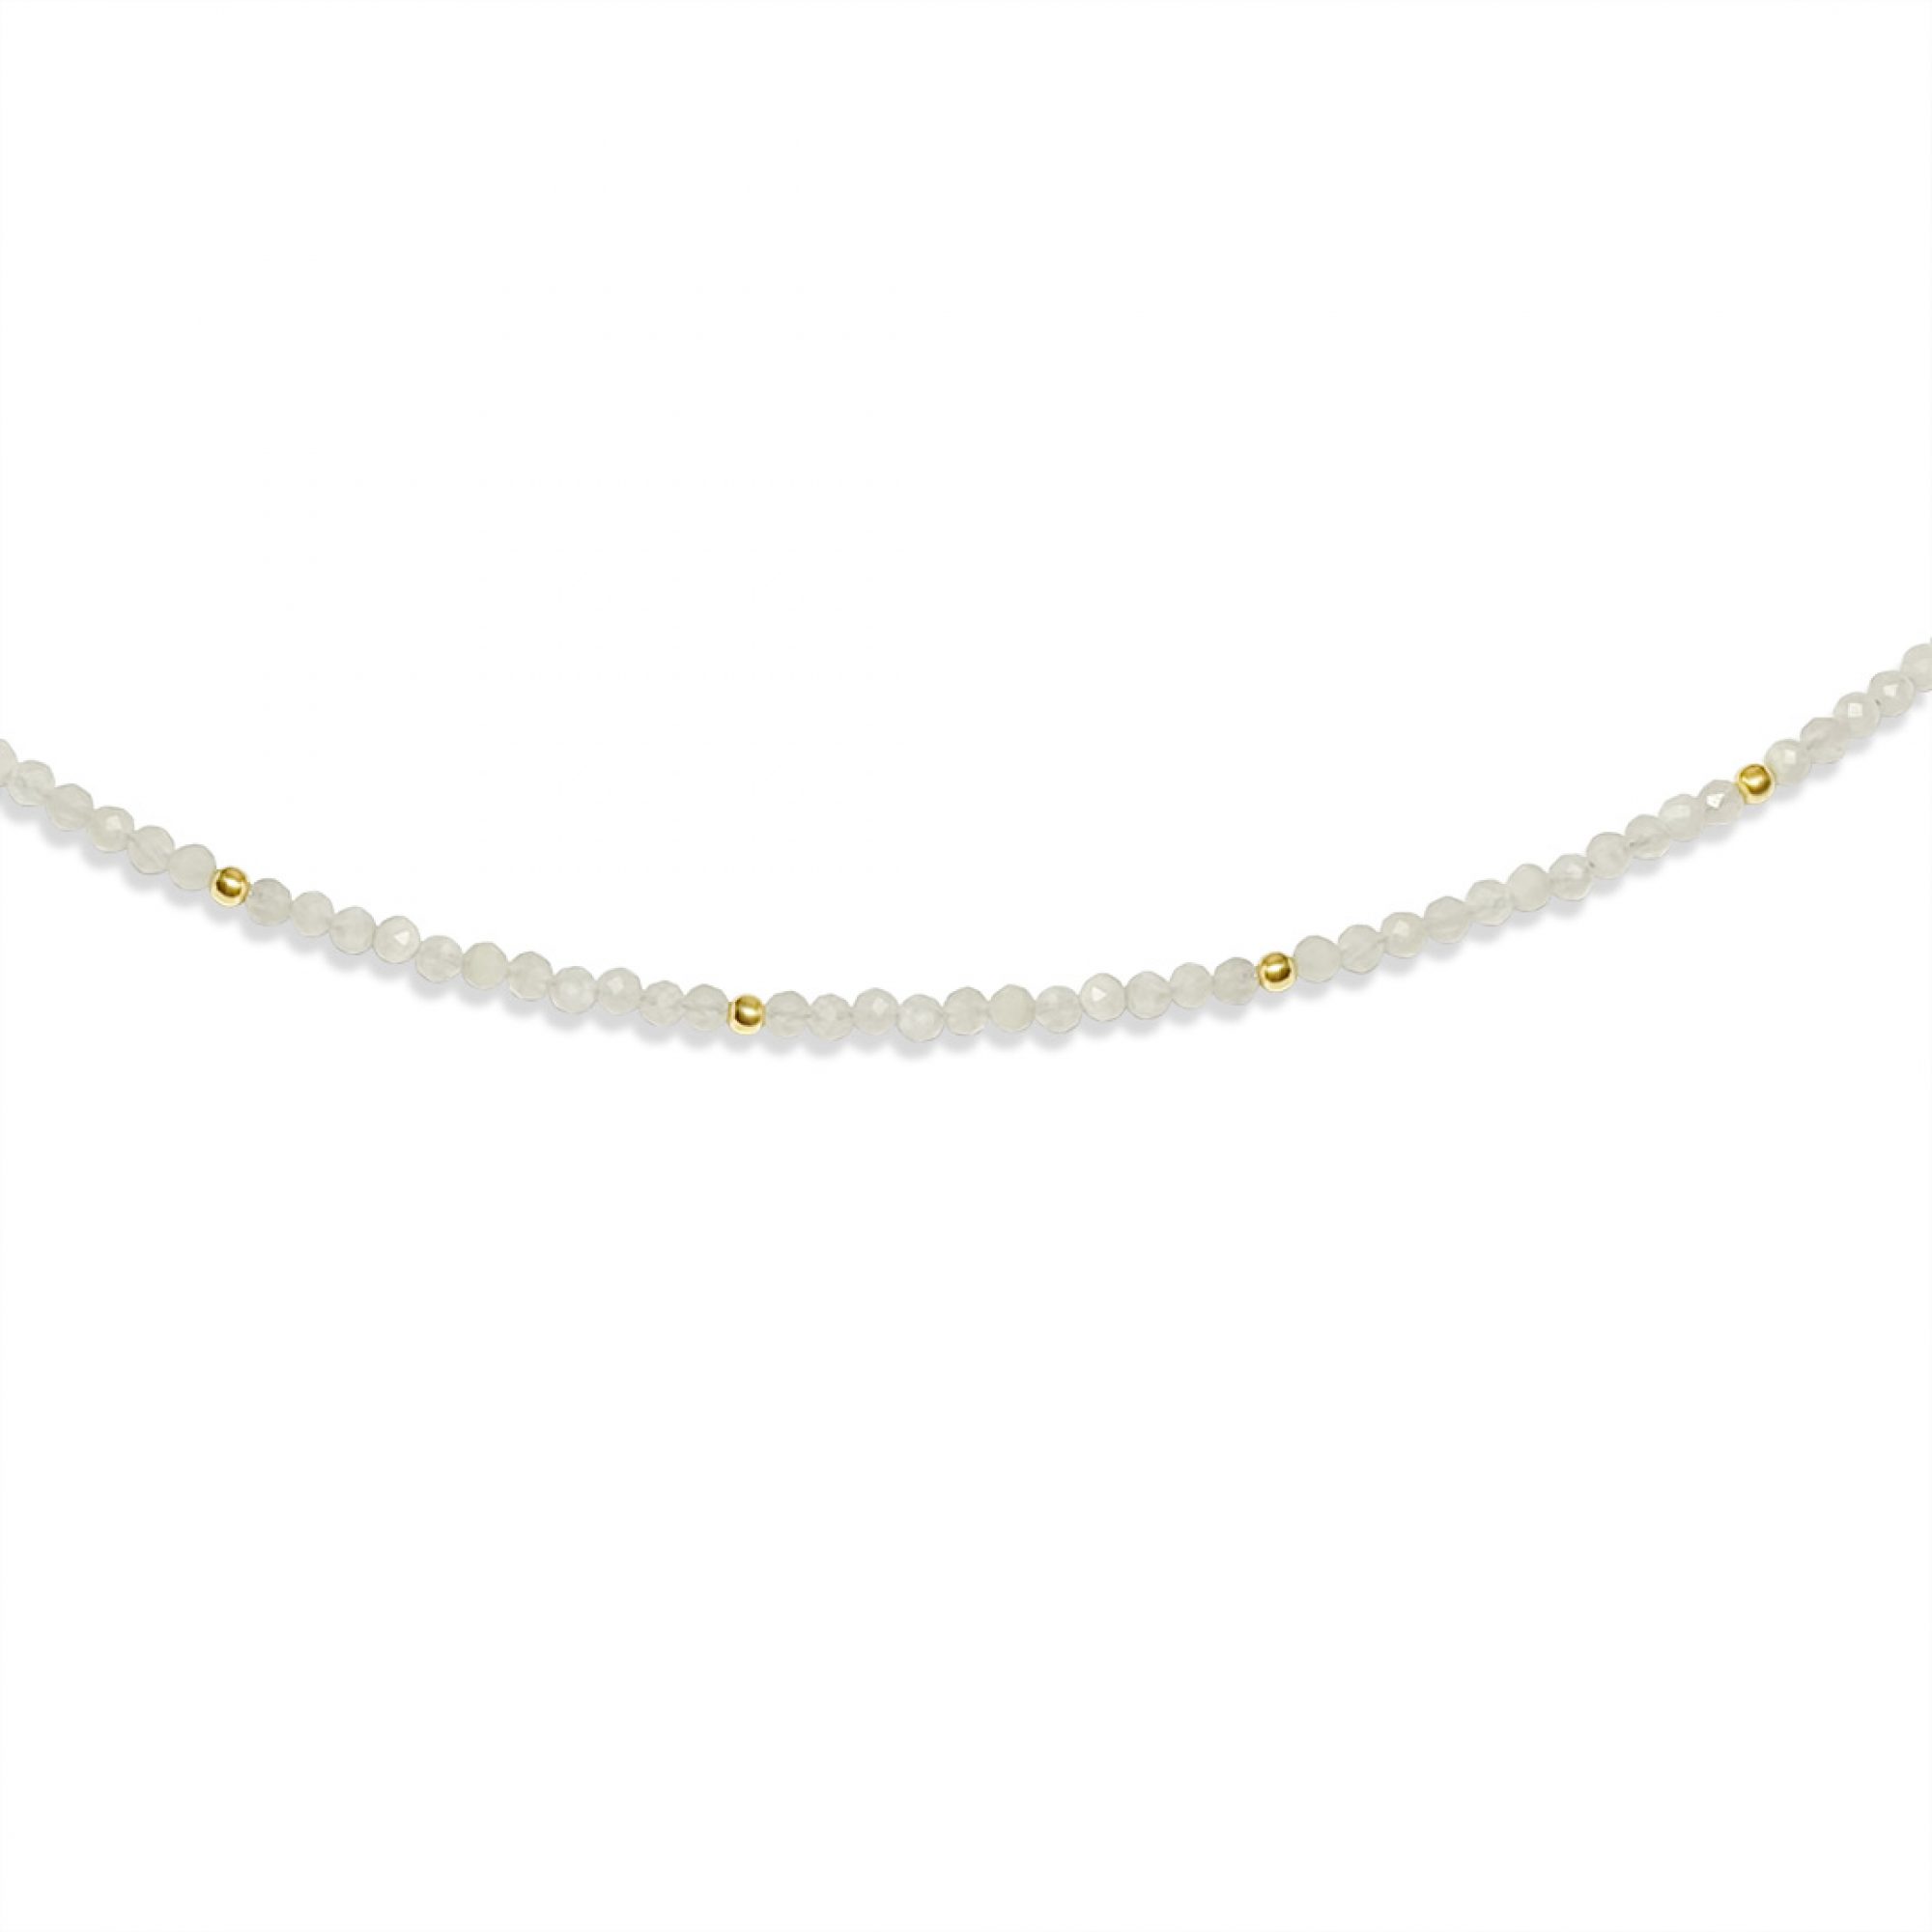 Gold plated anklet with moonstone beads